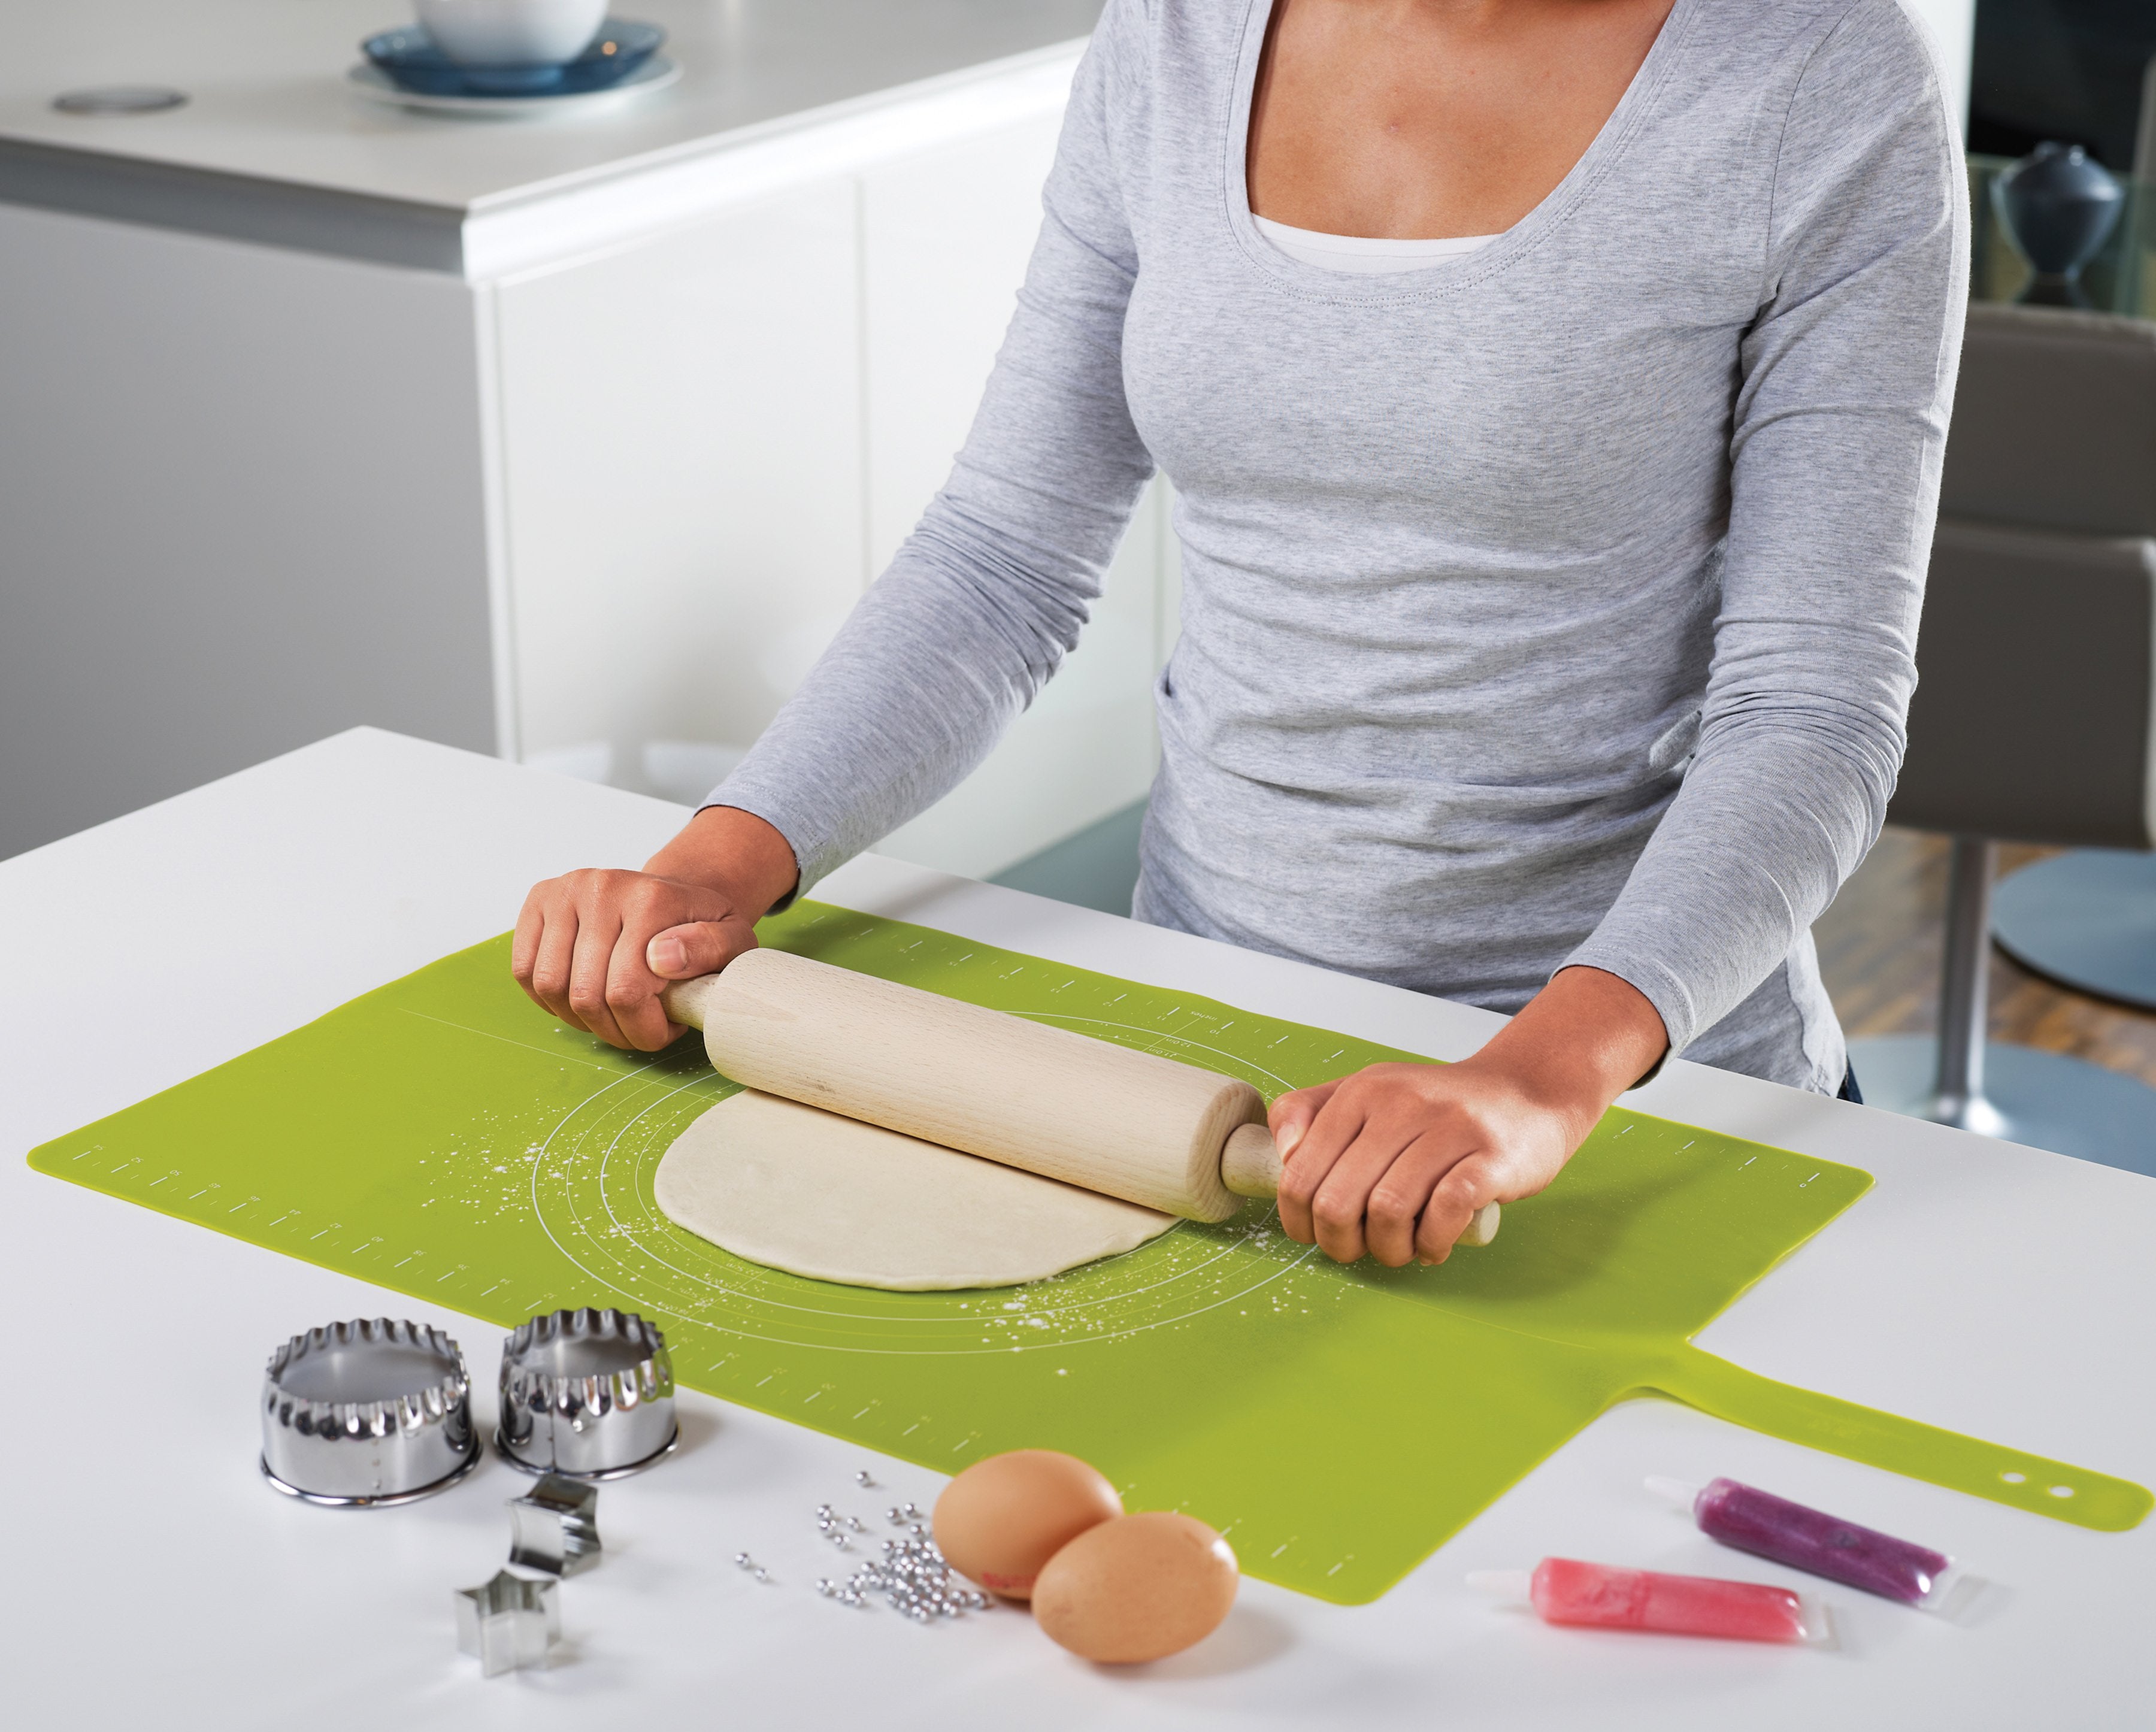 BEON.COM.AU  This large, silicone pastry mat provides a hygienic, non-slip surface for preparing all kinds of pastry and icing.  Hygienic, non-slip silicone surface for rolling pastry or icing Integrated strap keeps mat rolled for convenient storage Large rolling area Printed rolling size guide for preparing... Joseph Joseph at BEON.COM.AU